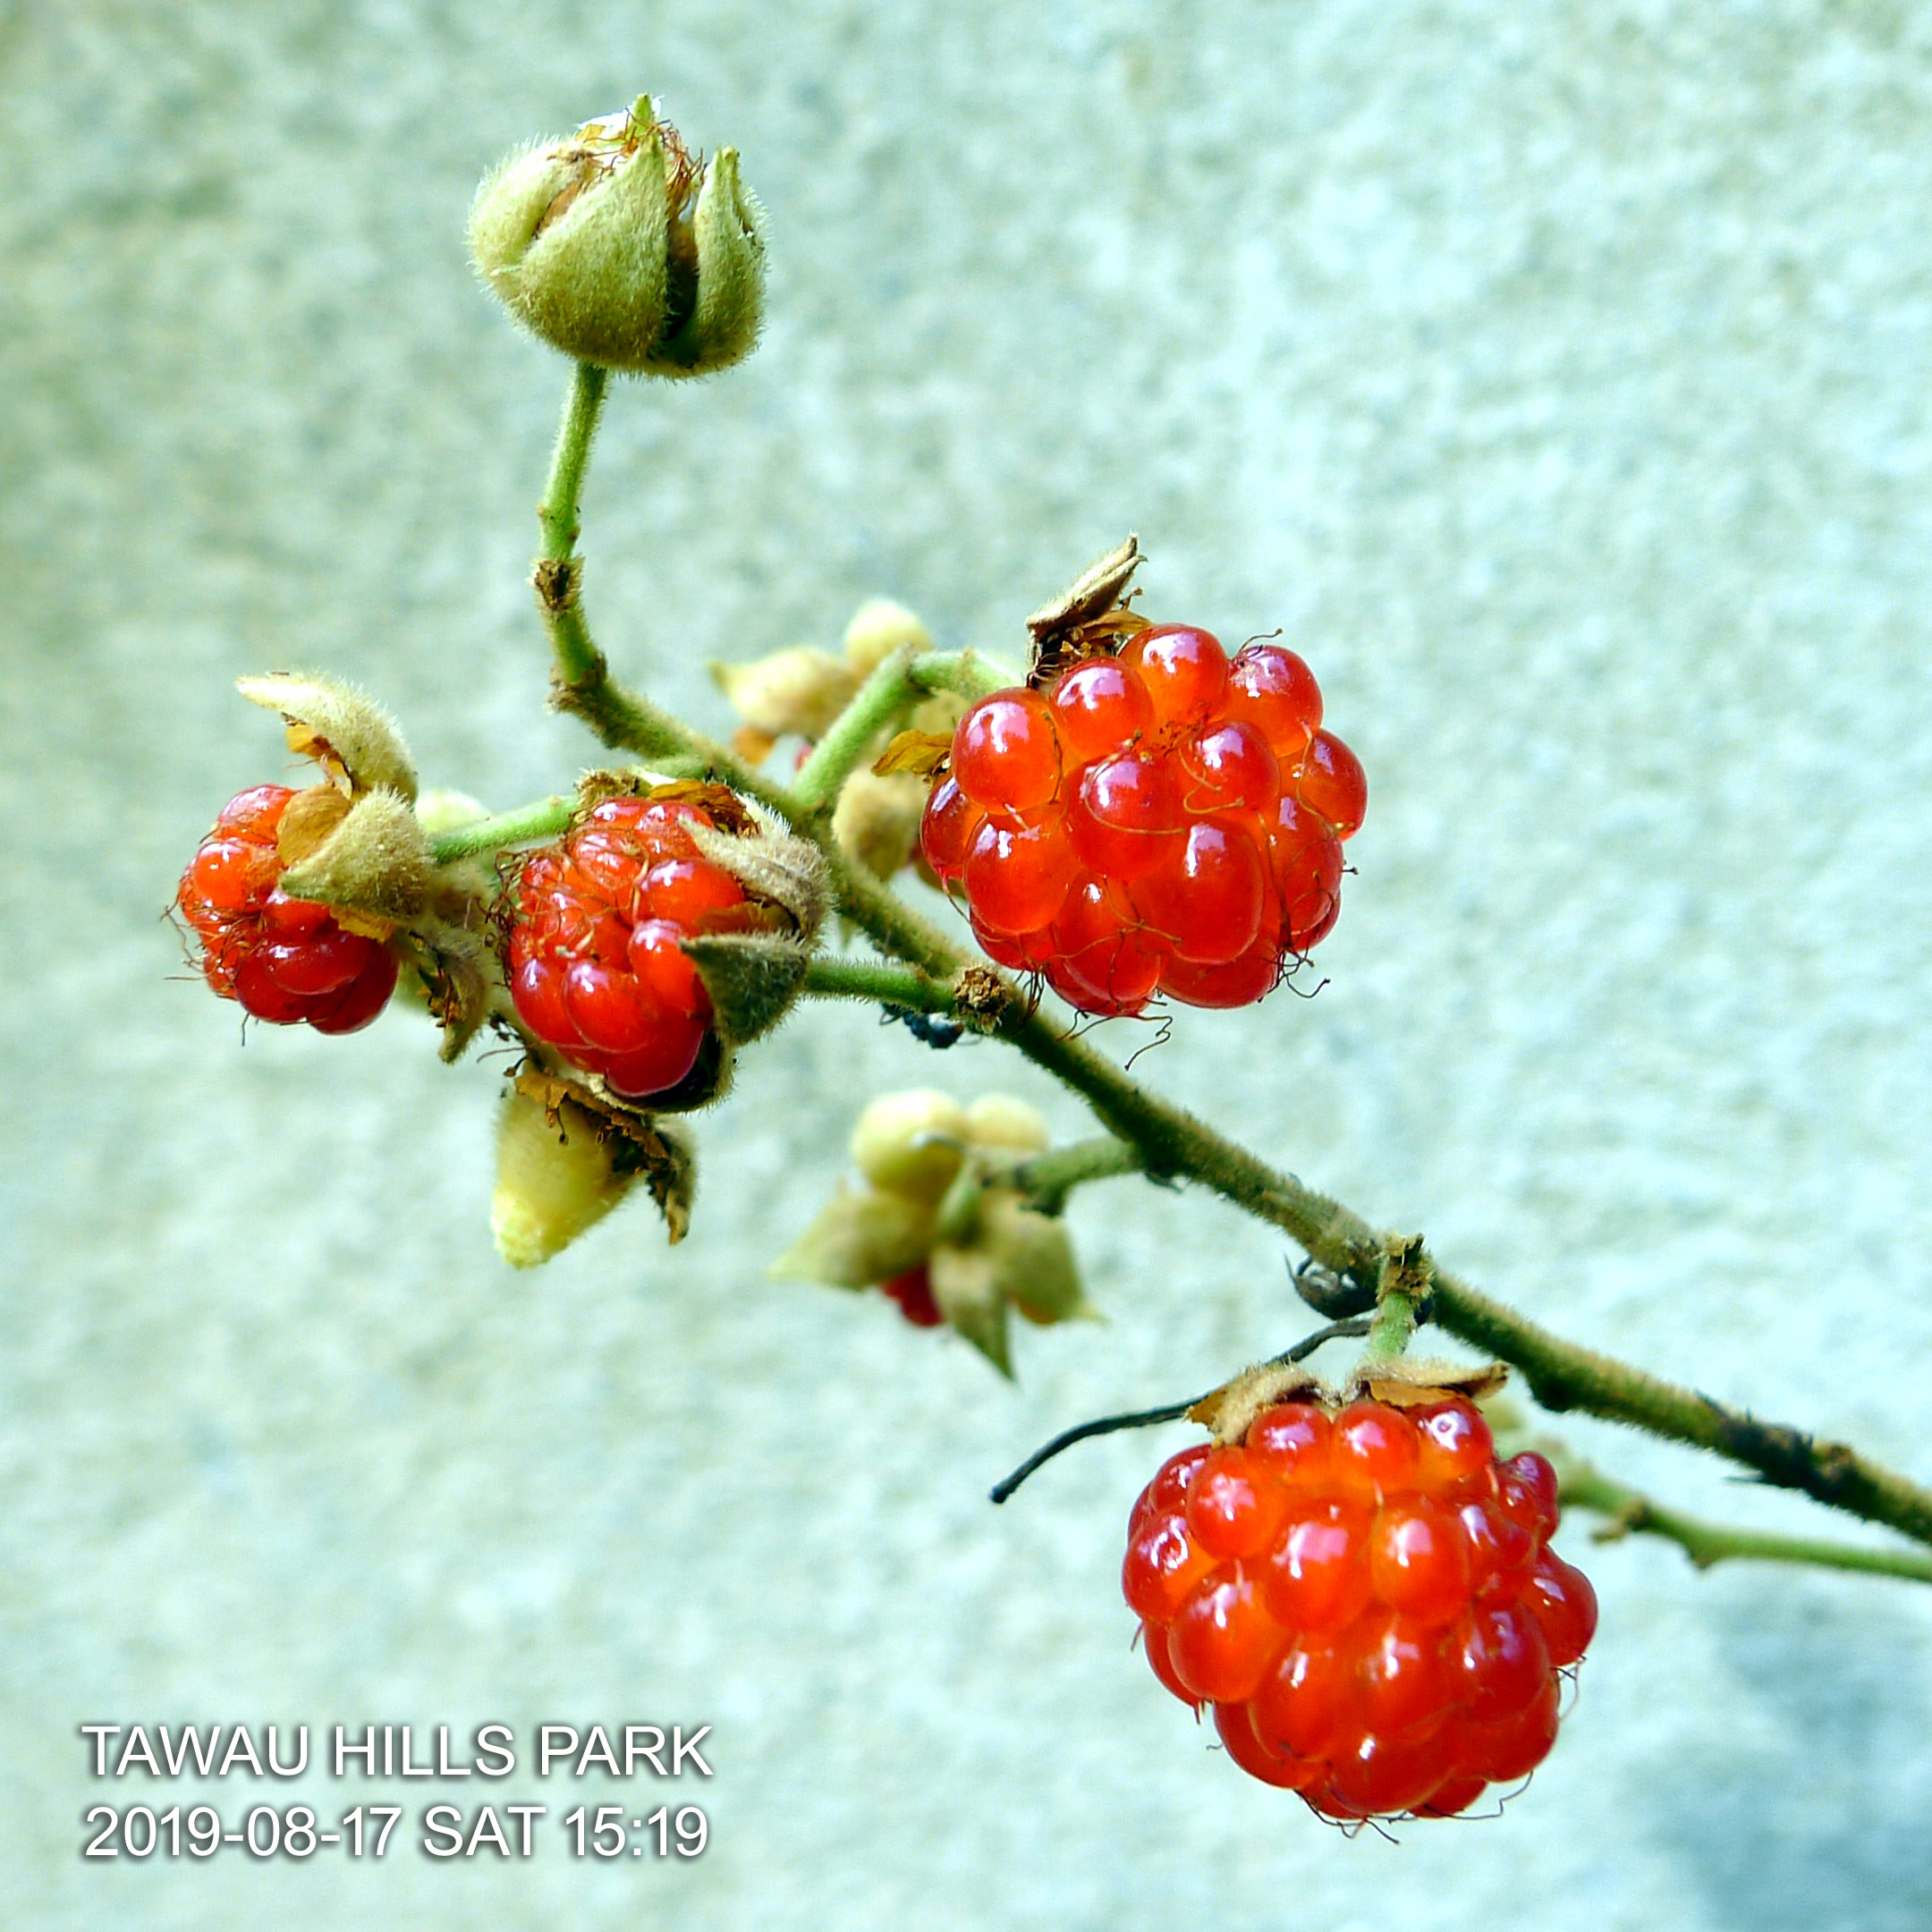 Wild strawberry  in Tawau Hills Park in Sabah, Borneo, Malaysia. The foods of the animals in the park.